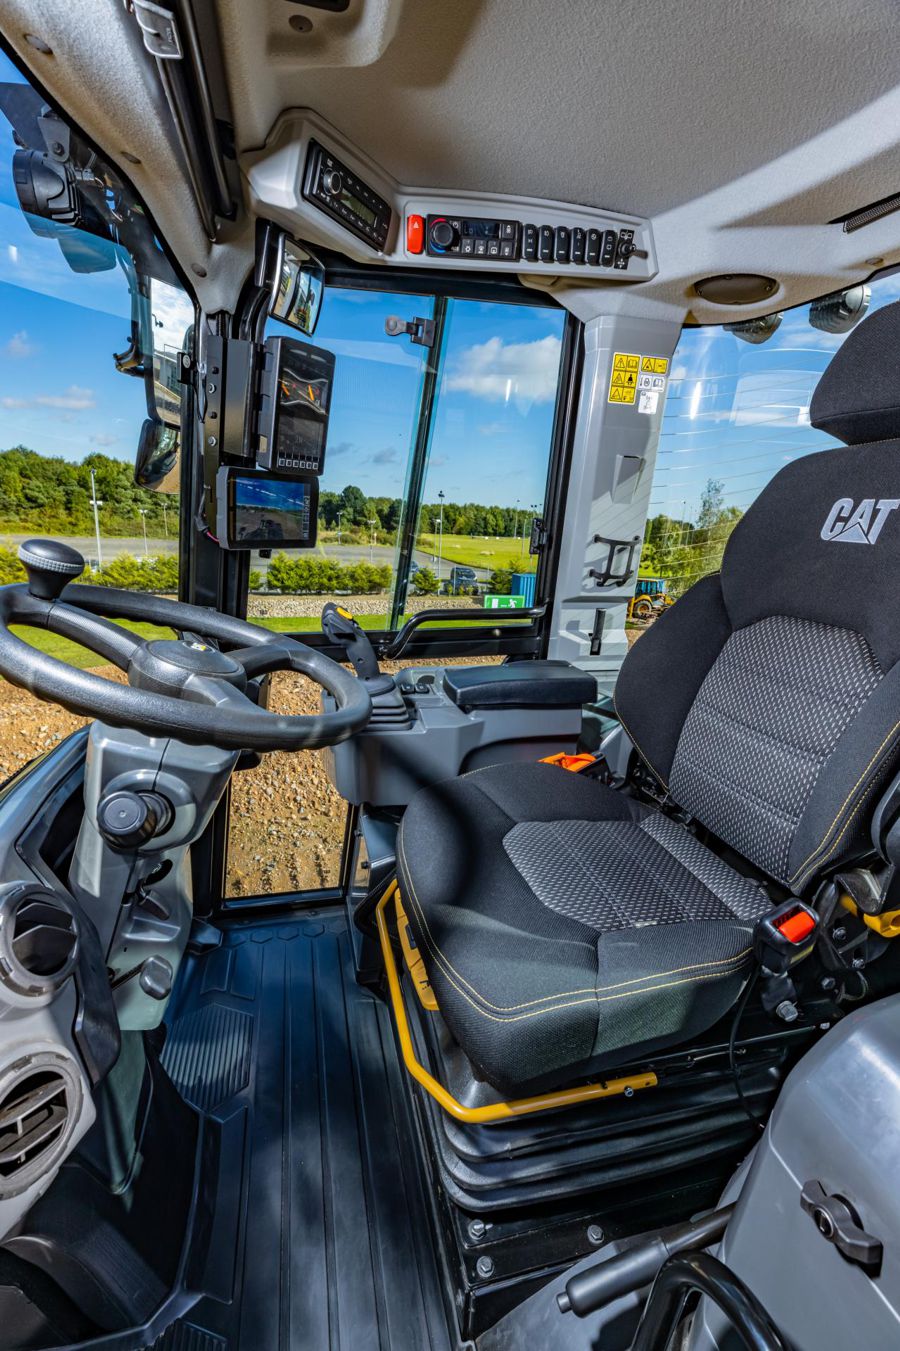 Cat reveals new next-generation 906, 907 and 908 Compact Wheel Loaders